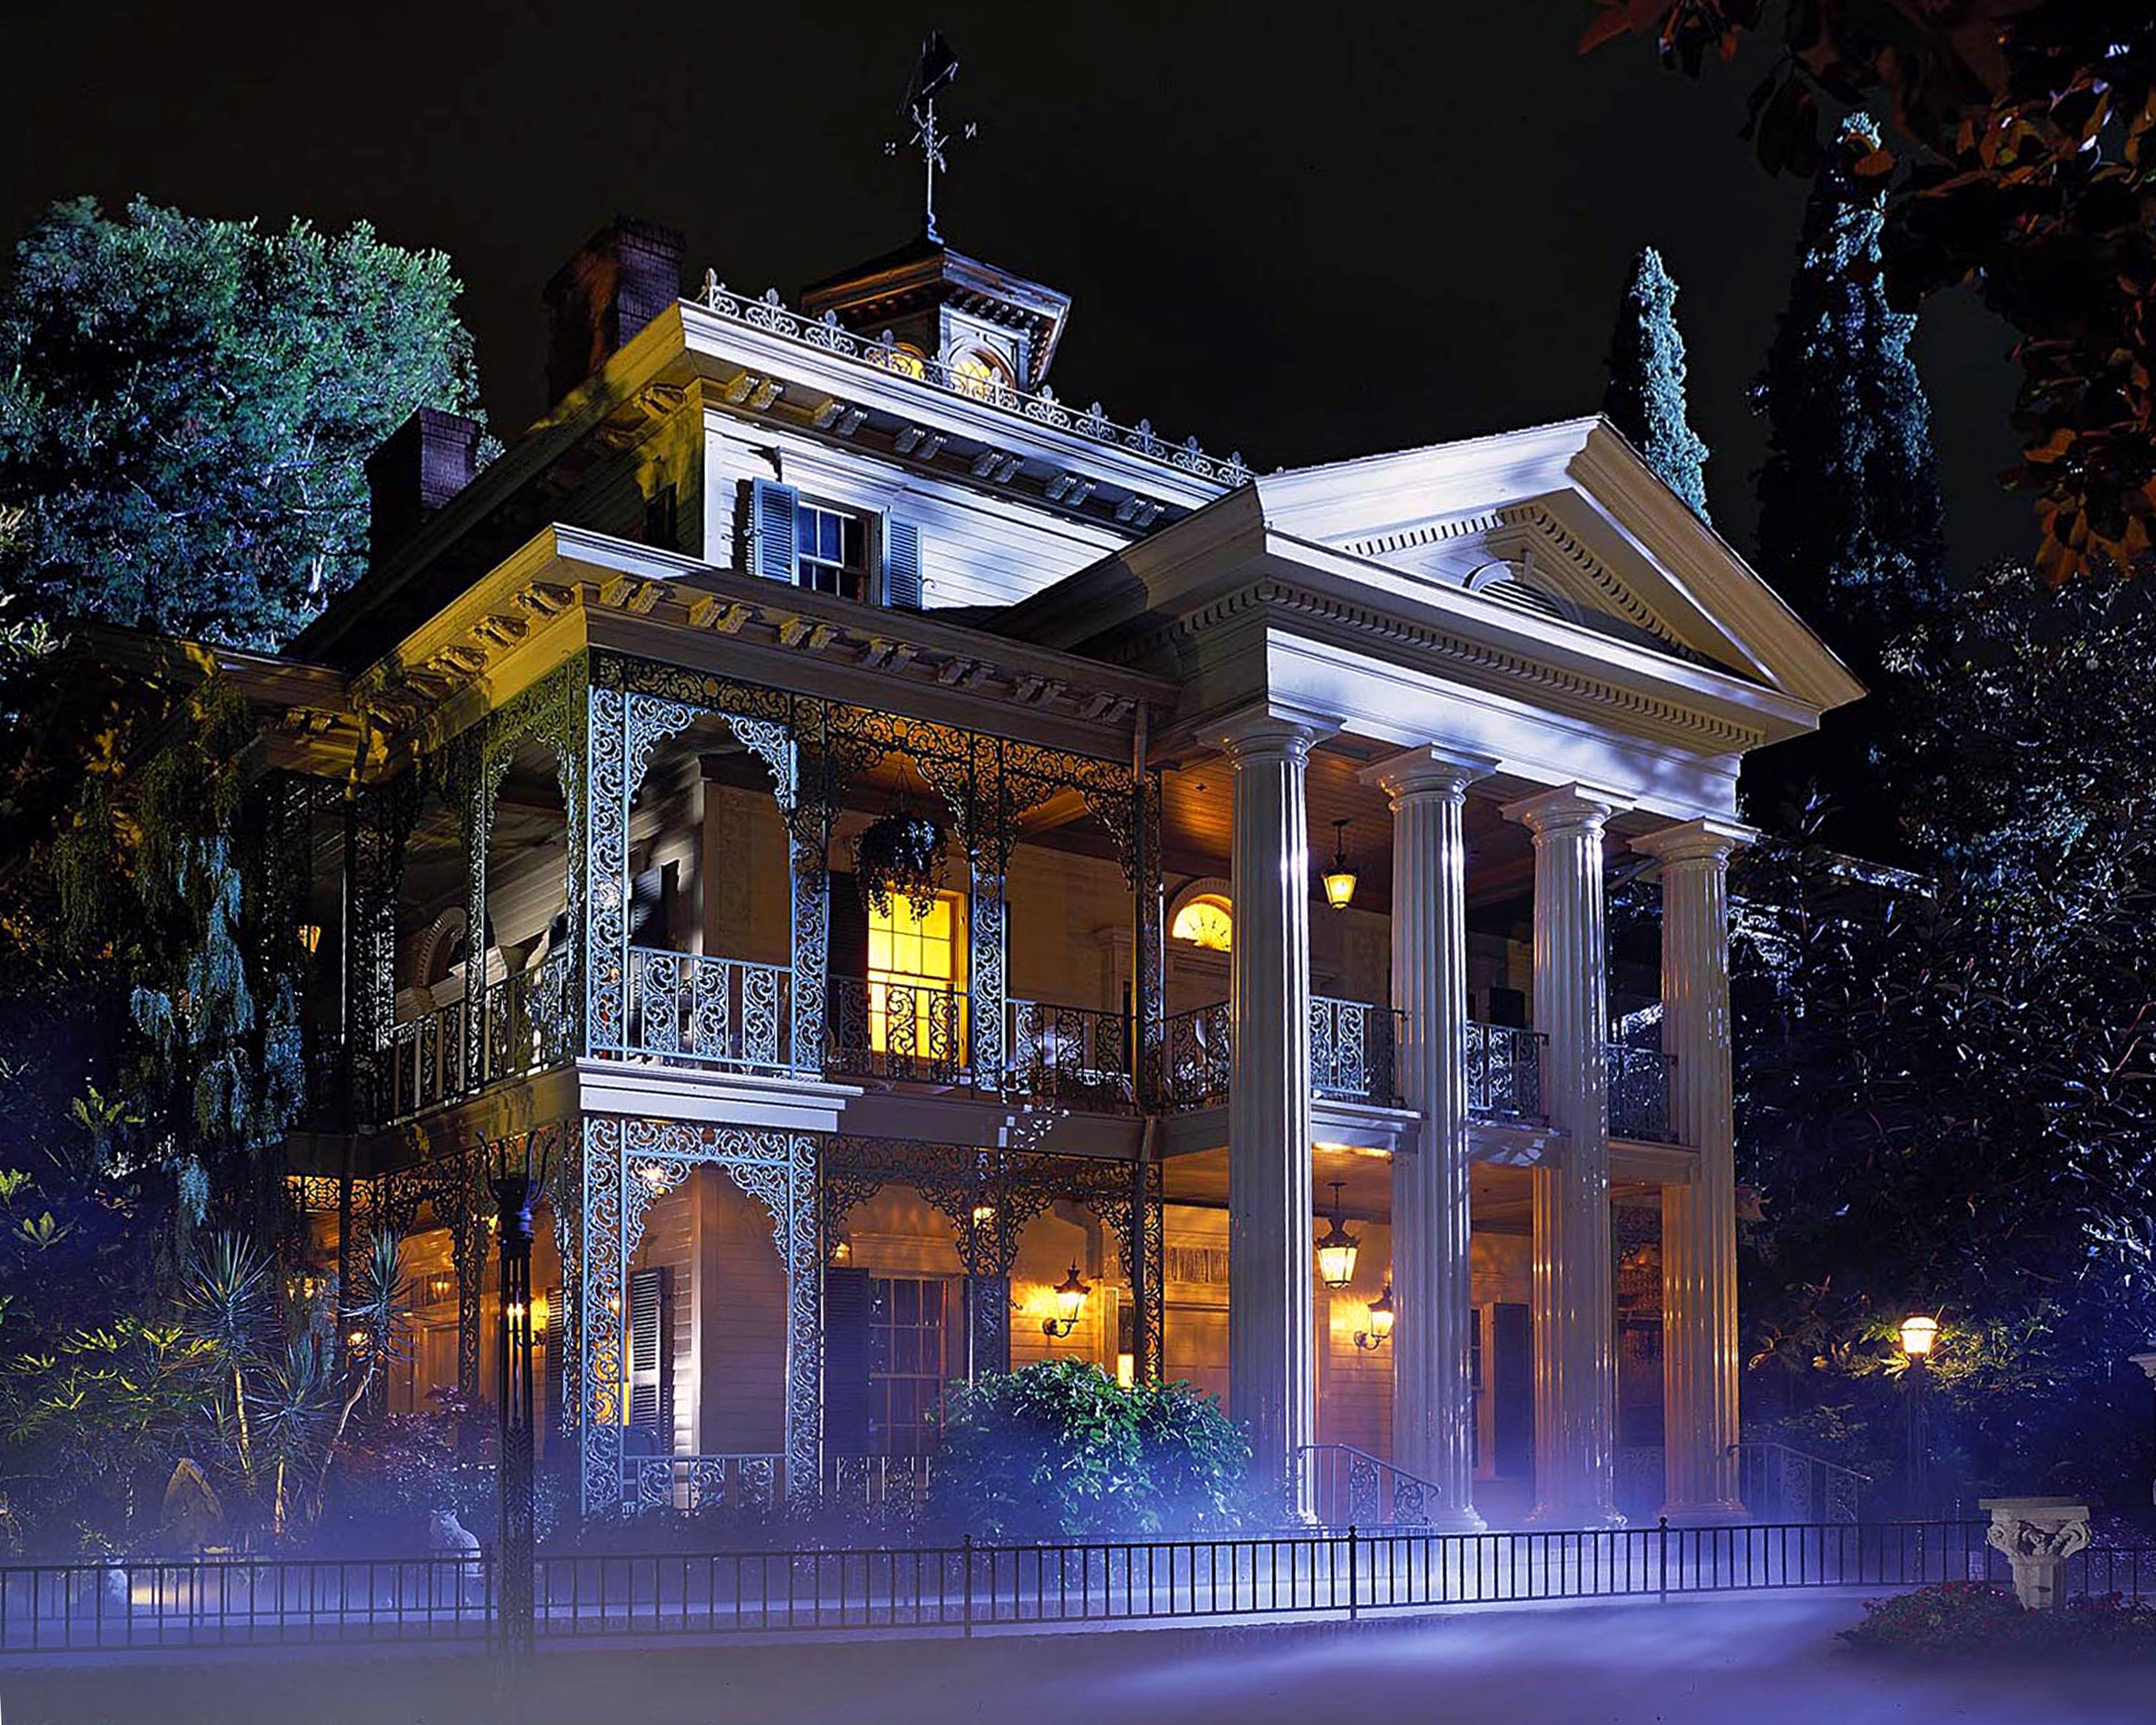 HAUNTED MANSION -Ð This New Orleans Square